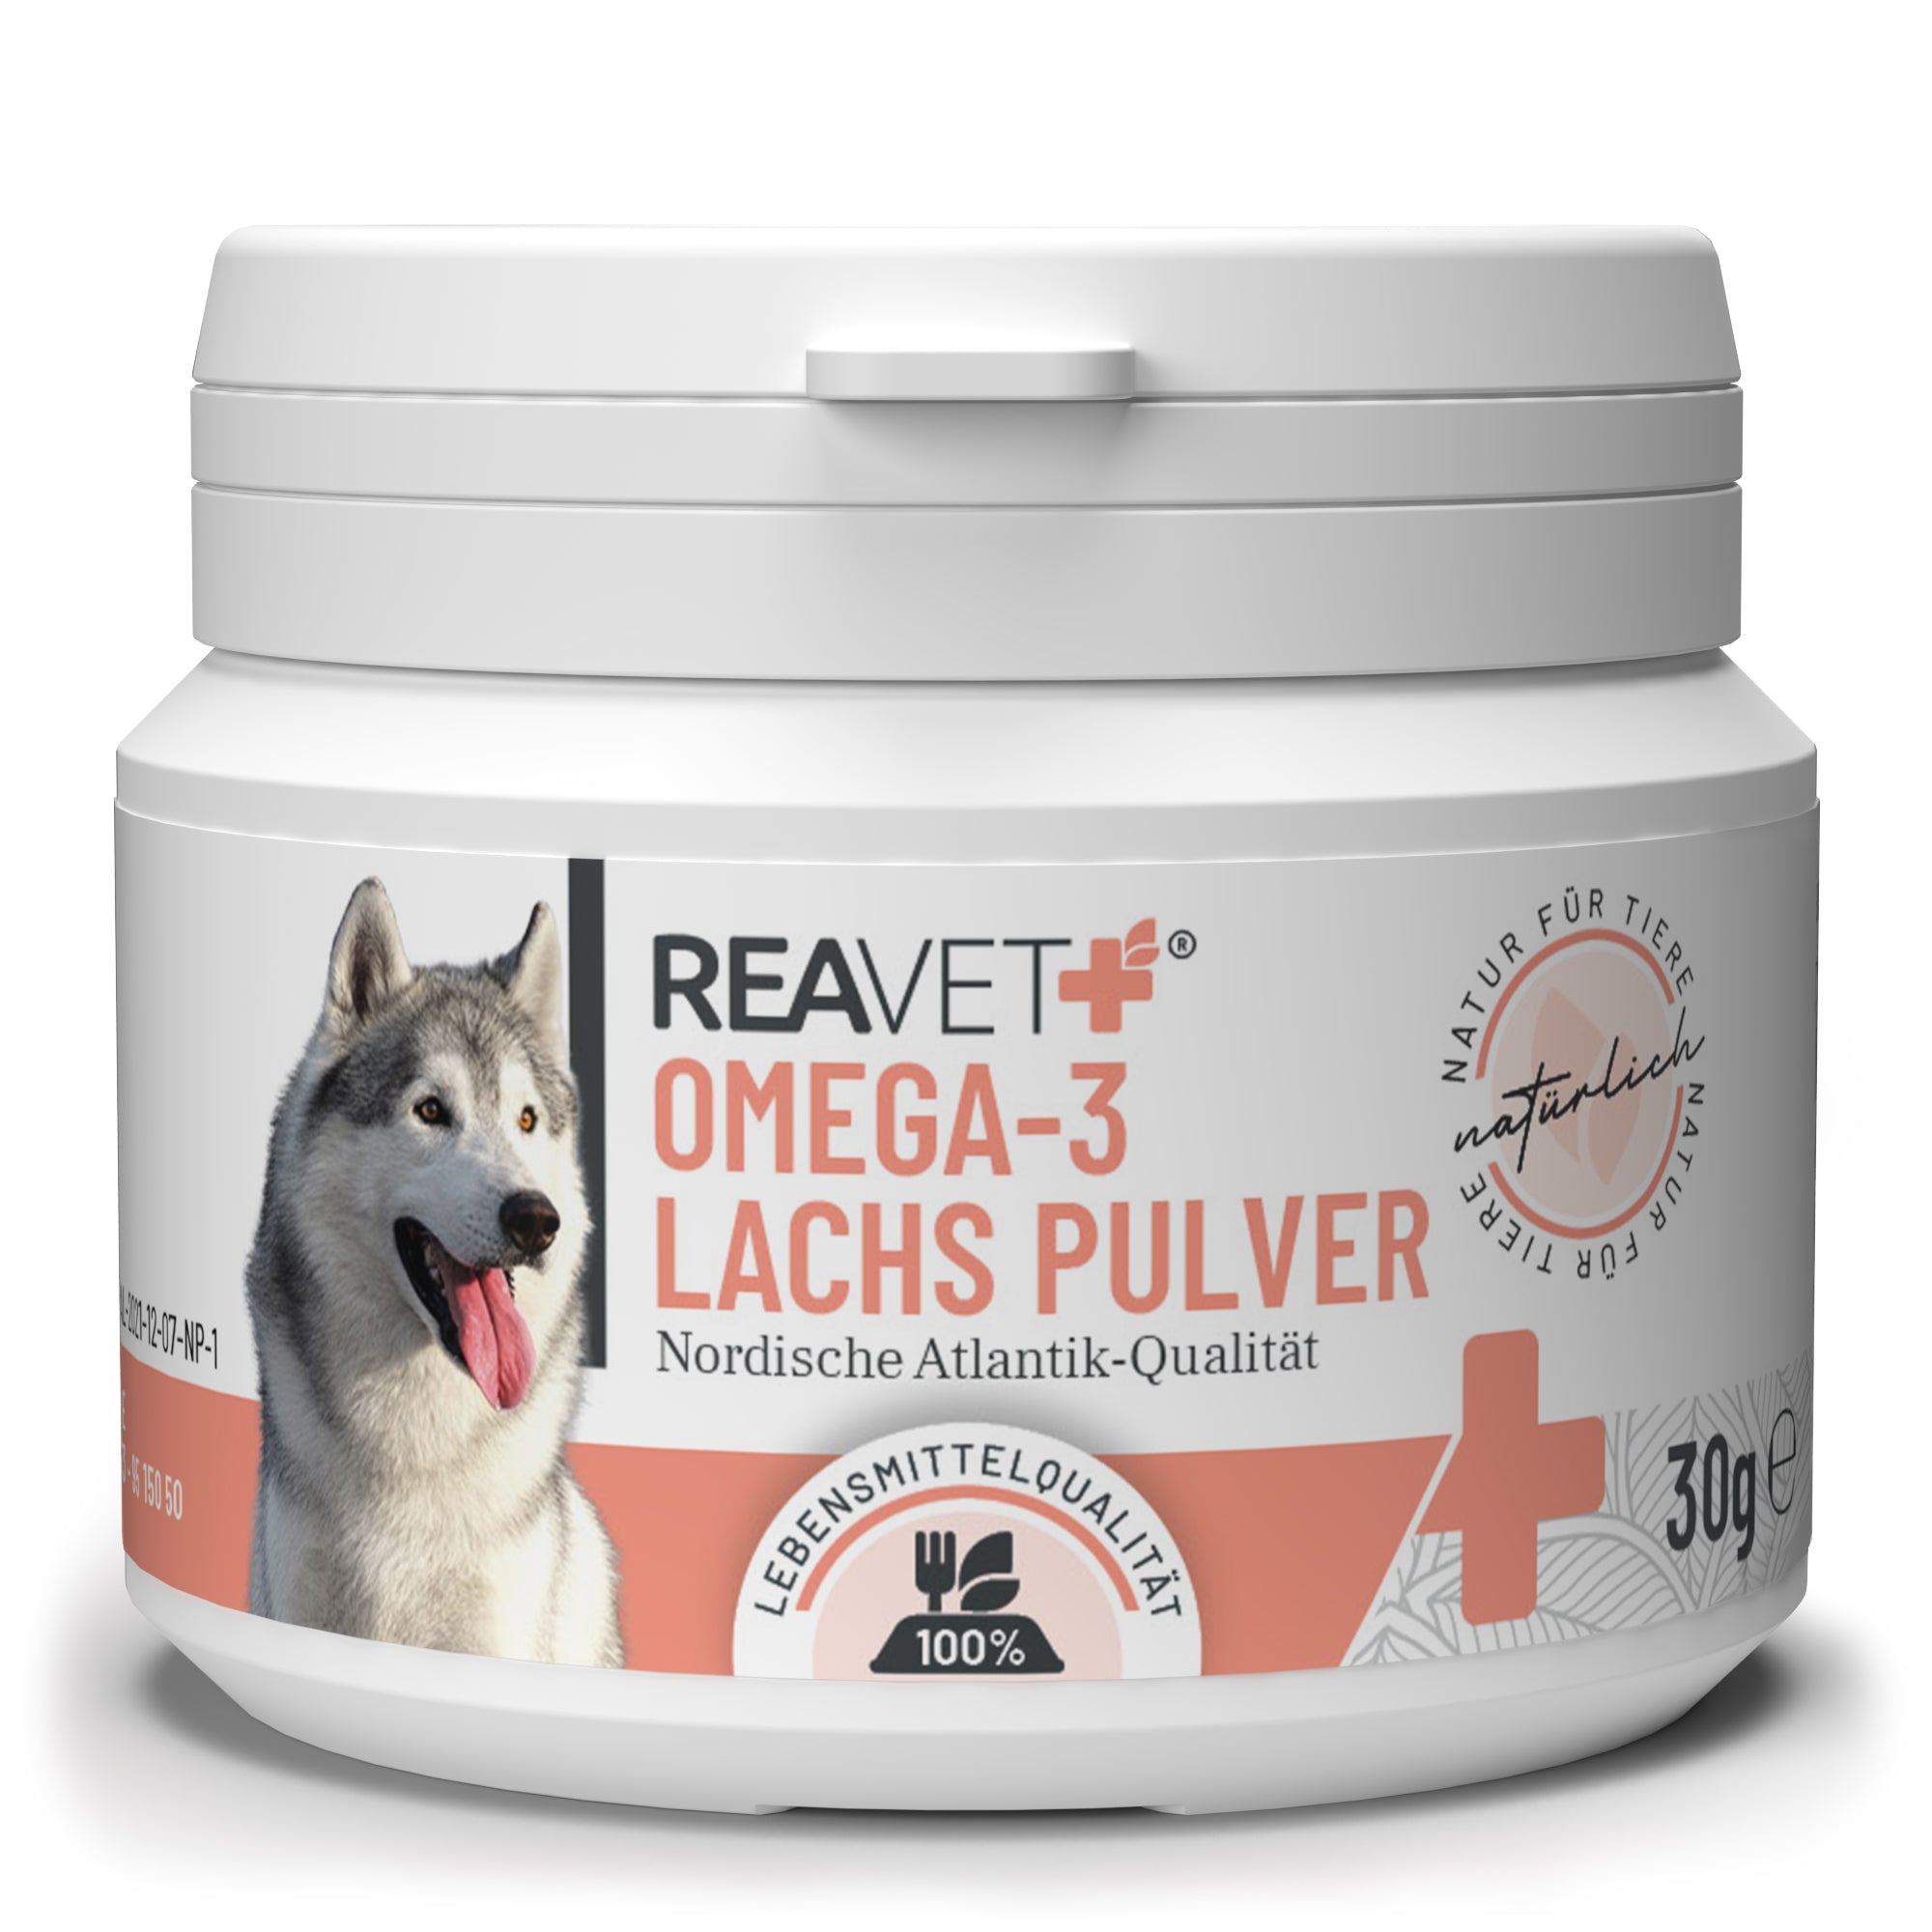 ReaVet-Omega-3-Lachs-Pulver-30g